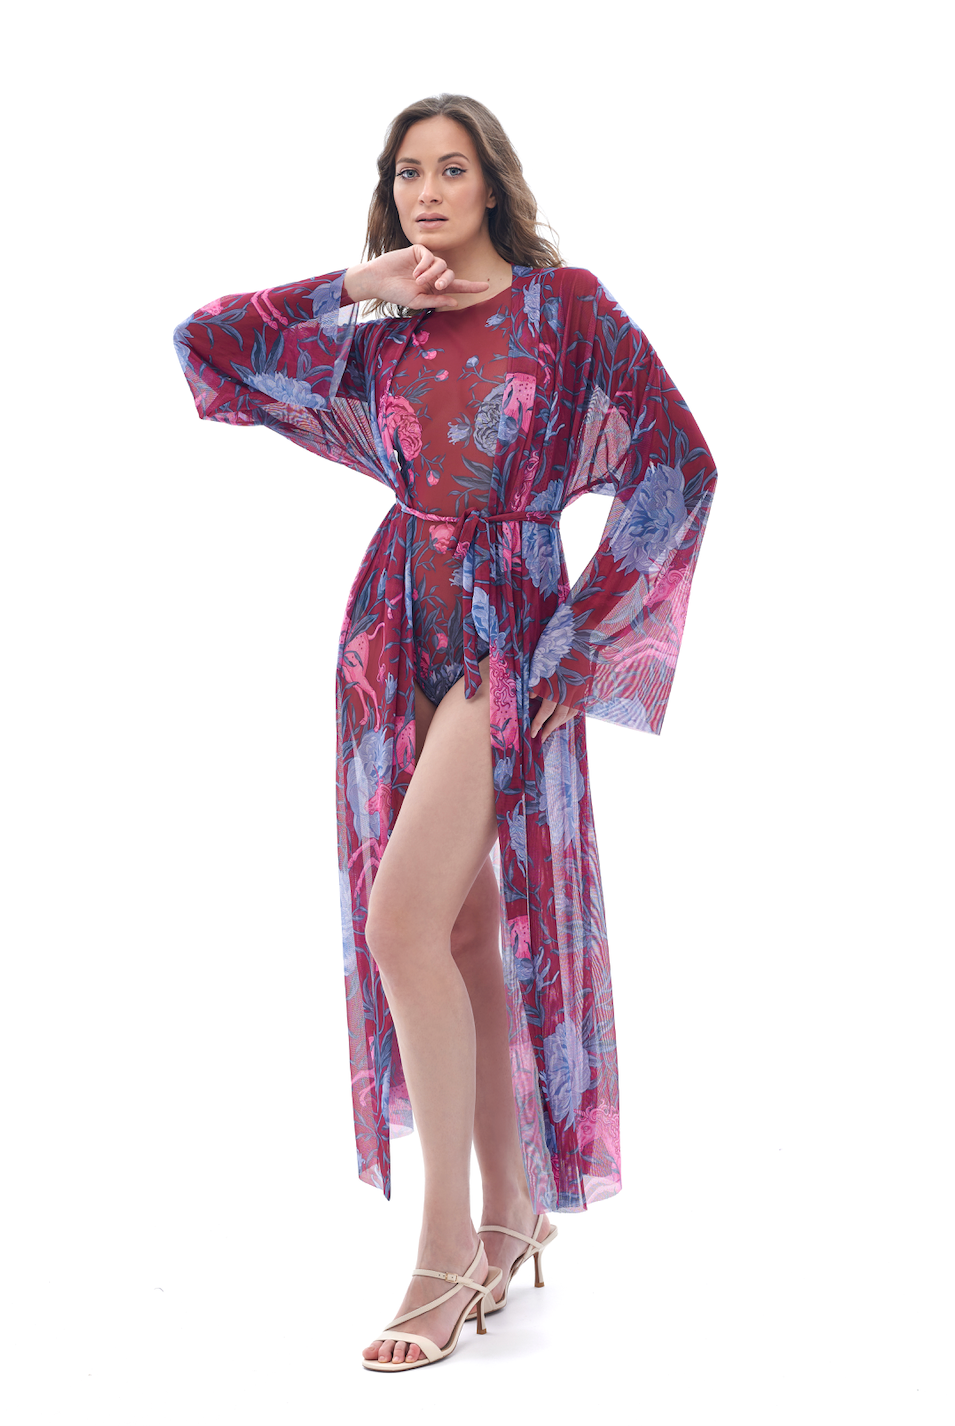  Discover sustainable tan-through smart swimsuits in a chic peonies print. This file includes a beach robe, offering both style and sun protection with an SPF15 rating.